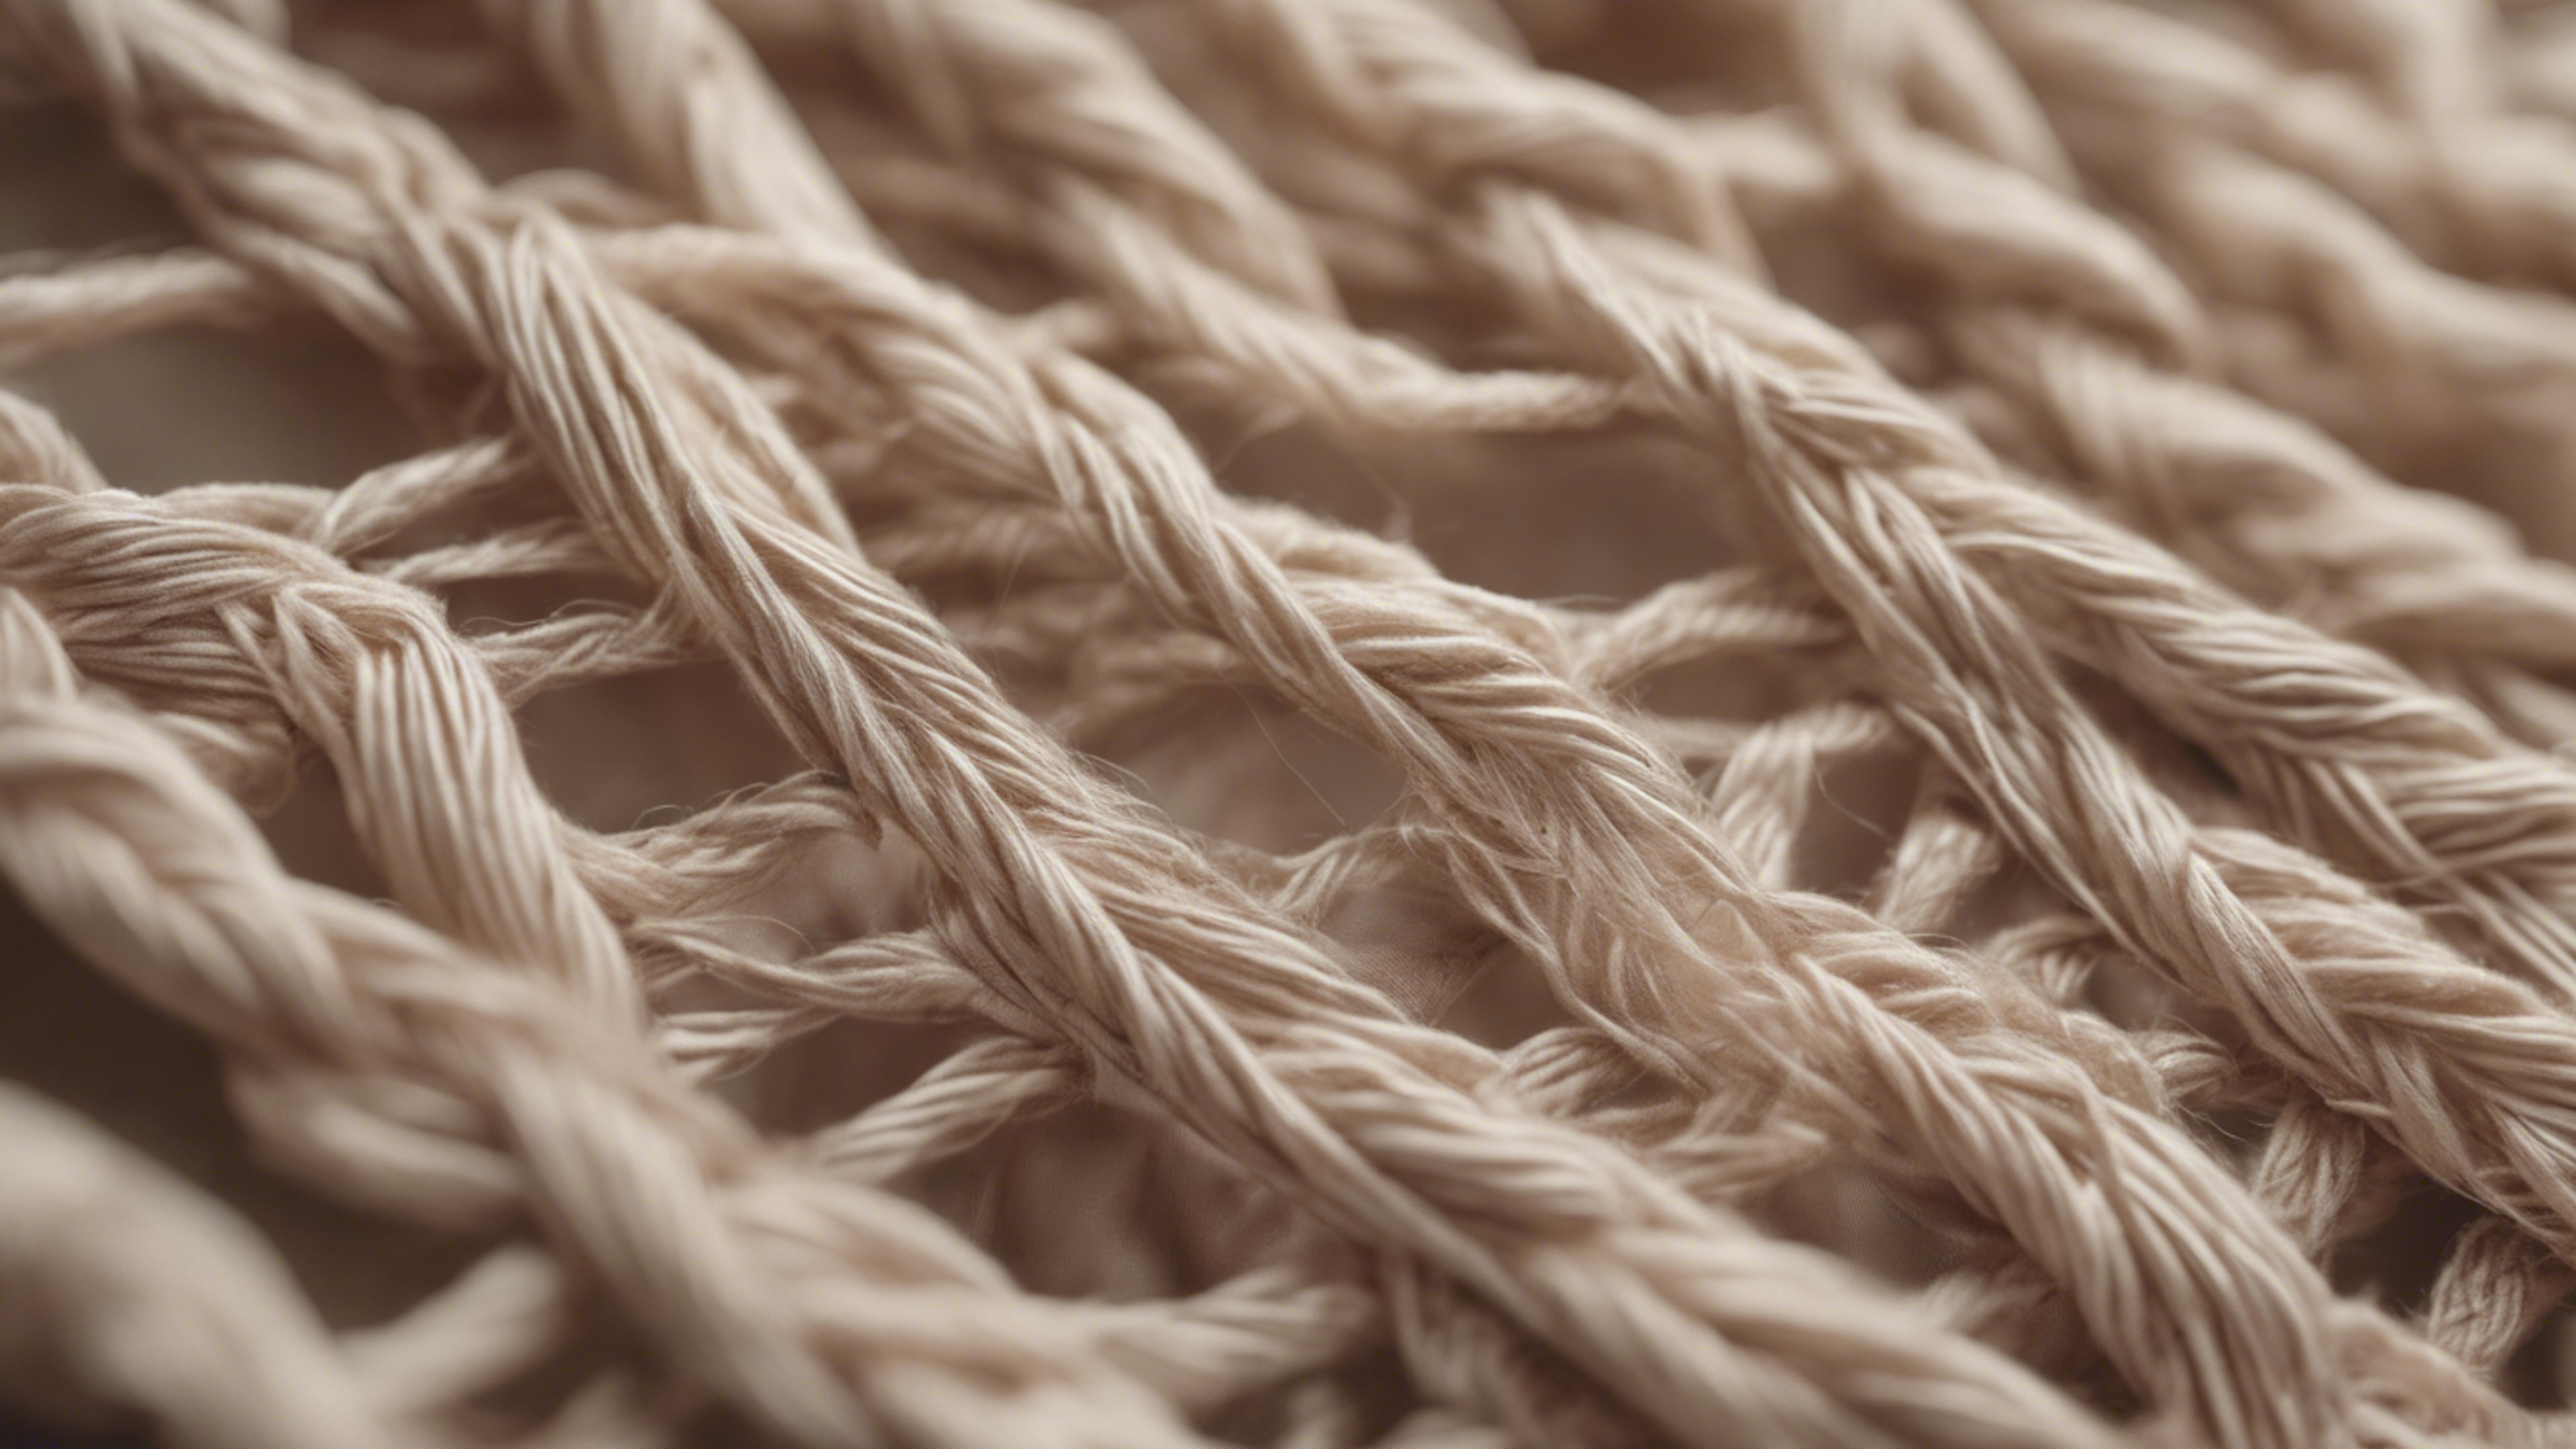 A close-up of cool beige threads interweaving to form a unique, patterned fabric. Behang[e47f0bd142b54d48a5a0]